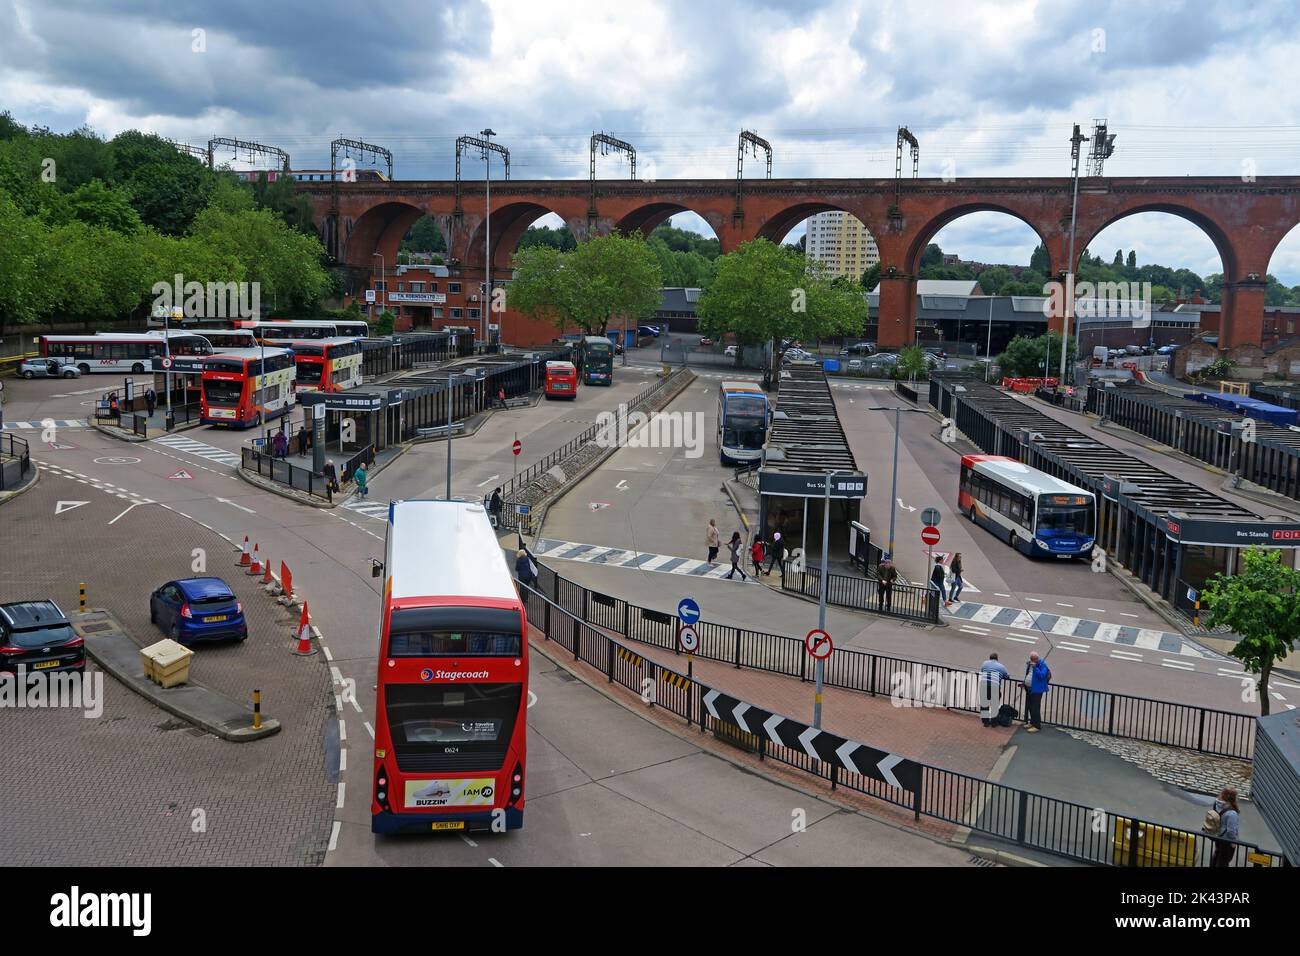 Stockport Bus Station, looking west towards viaduct , WCML between Stockport railway station and Manchester Piccadilly, Cheshire, England, UK,SK1 1NU Stock Photo